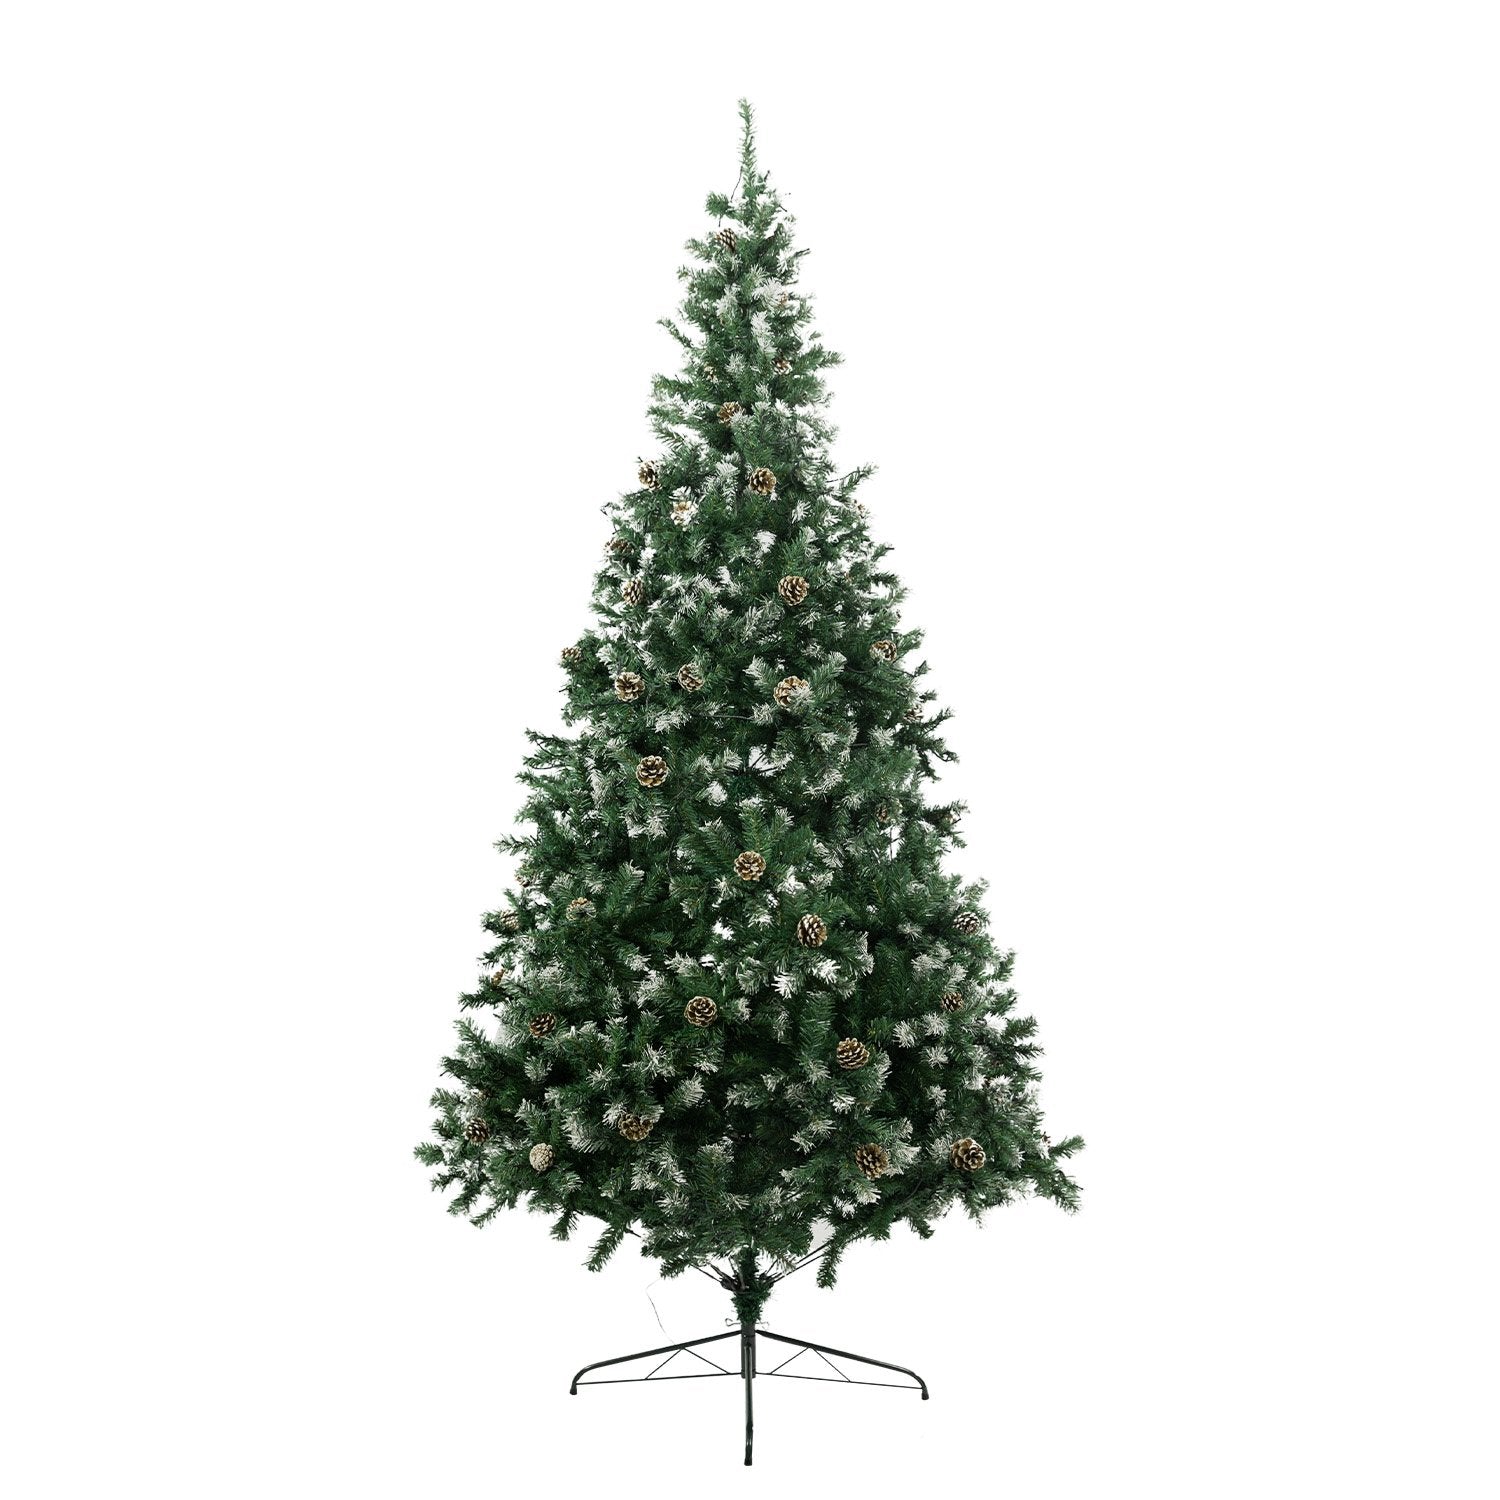 Christabelle 2.7m Pre Lit LED Christmas Tree Decor with Pine Cones Xmas Decorations - SILBERSHELL